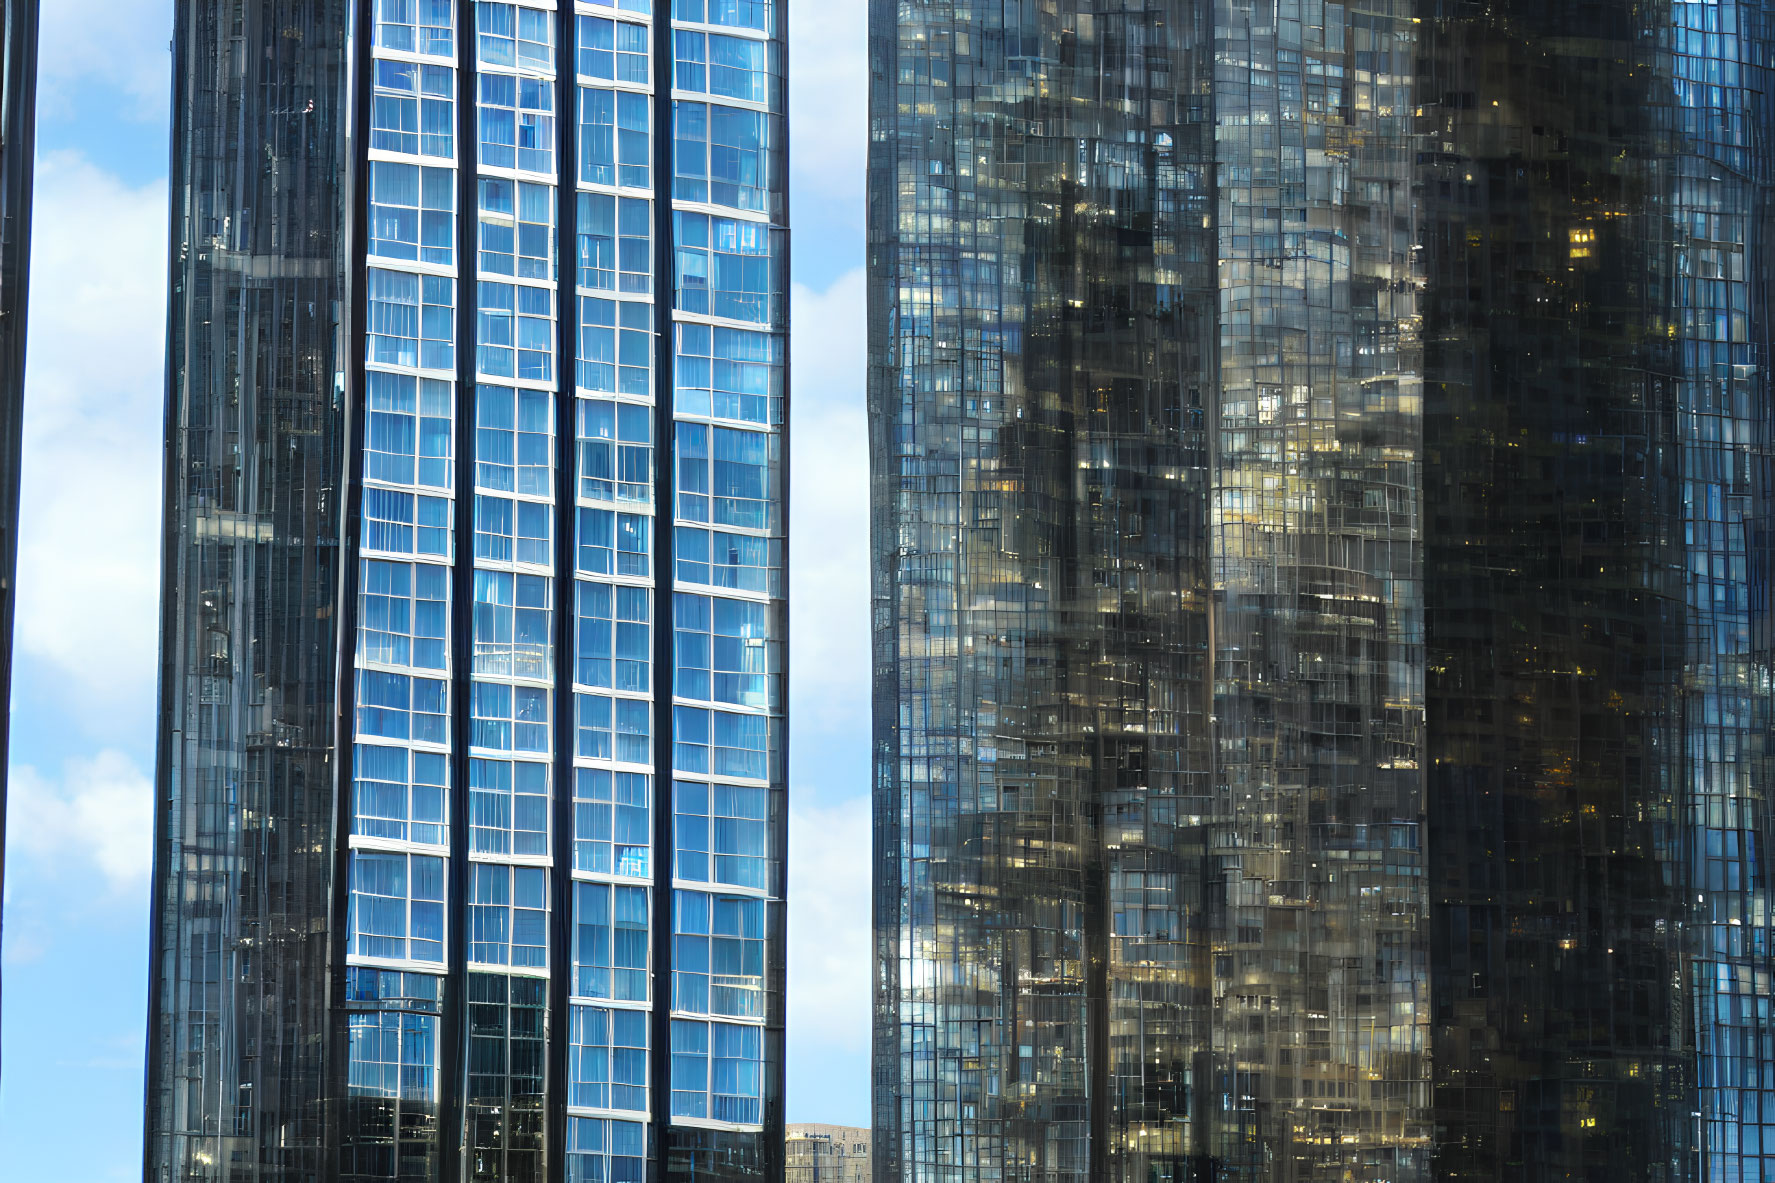 Contrasting skyscrapers with reflective glass facades